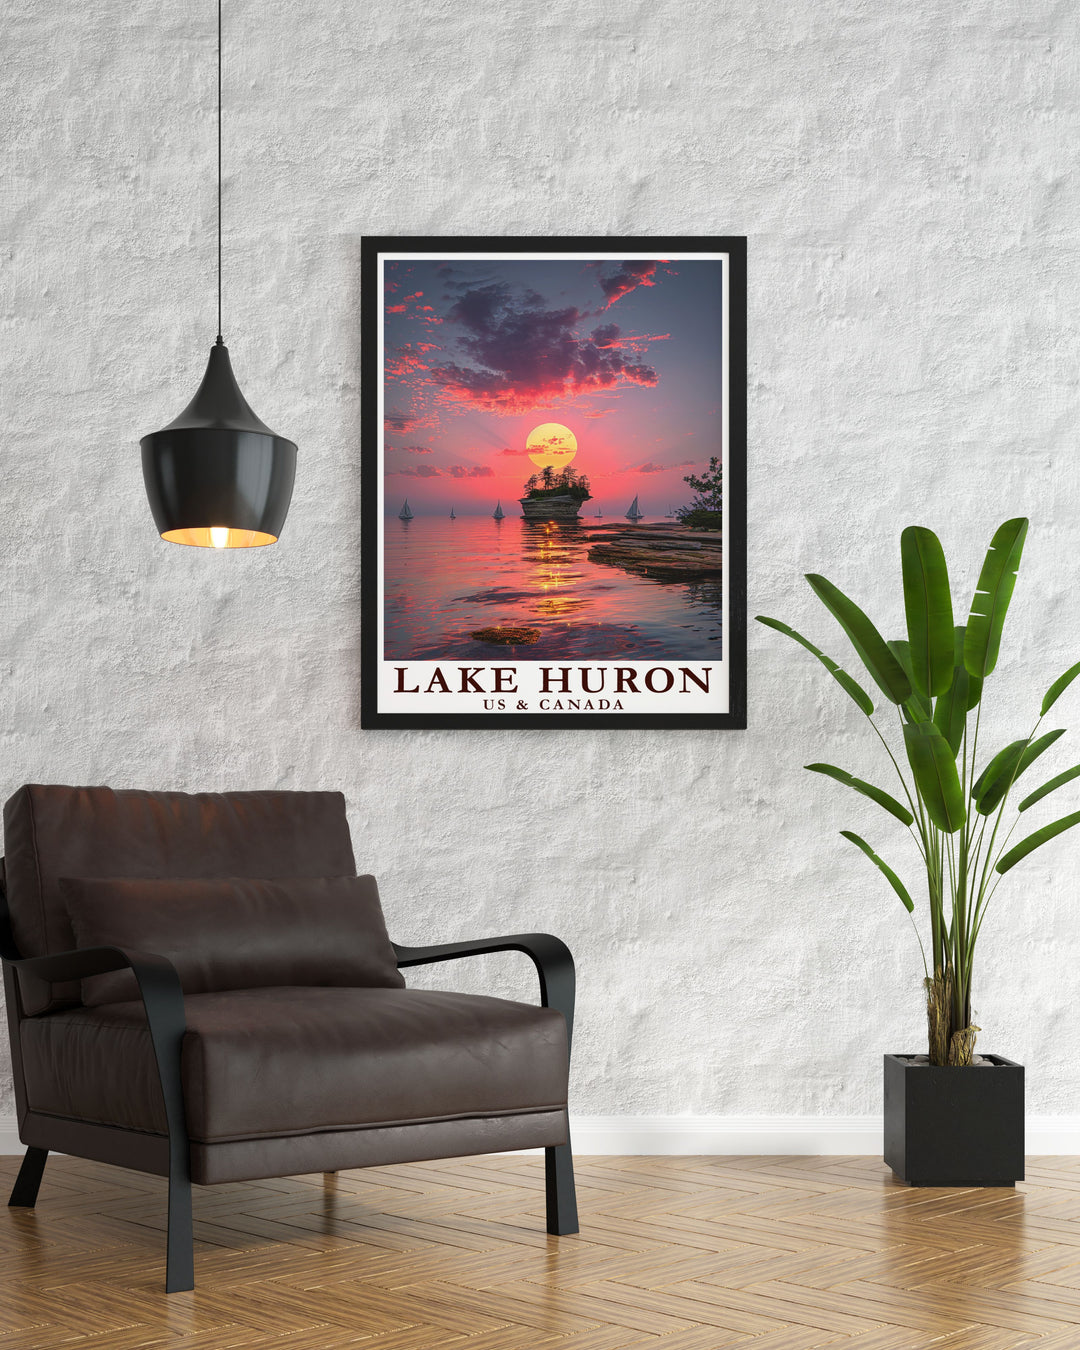 Discover the perfect gift with the Lake Huron digital download. Ideal for any occasion these prints offer a unique and personalized touch capturing the natural beauty of Lake Huron. Perfect for birthdays anniversaries and Christmas gifts